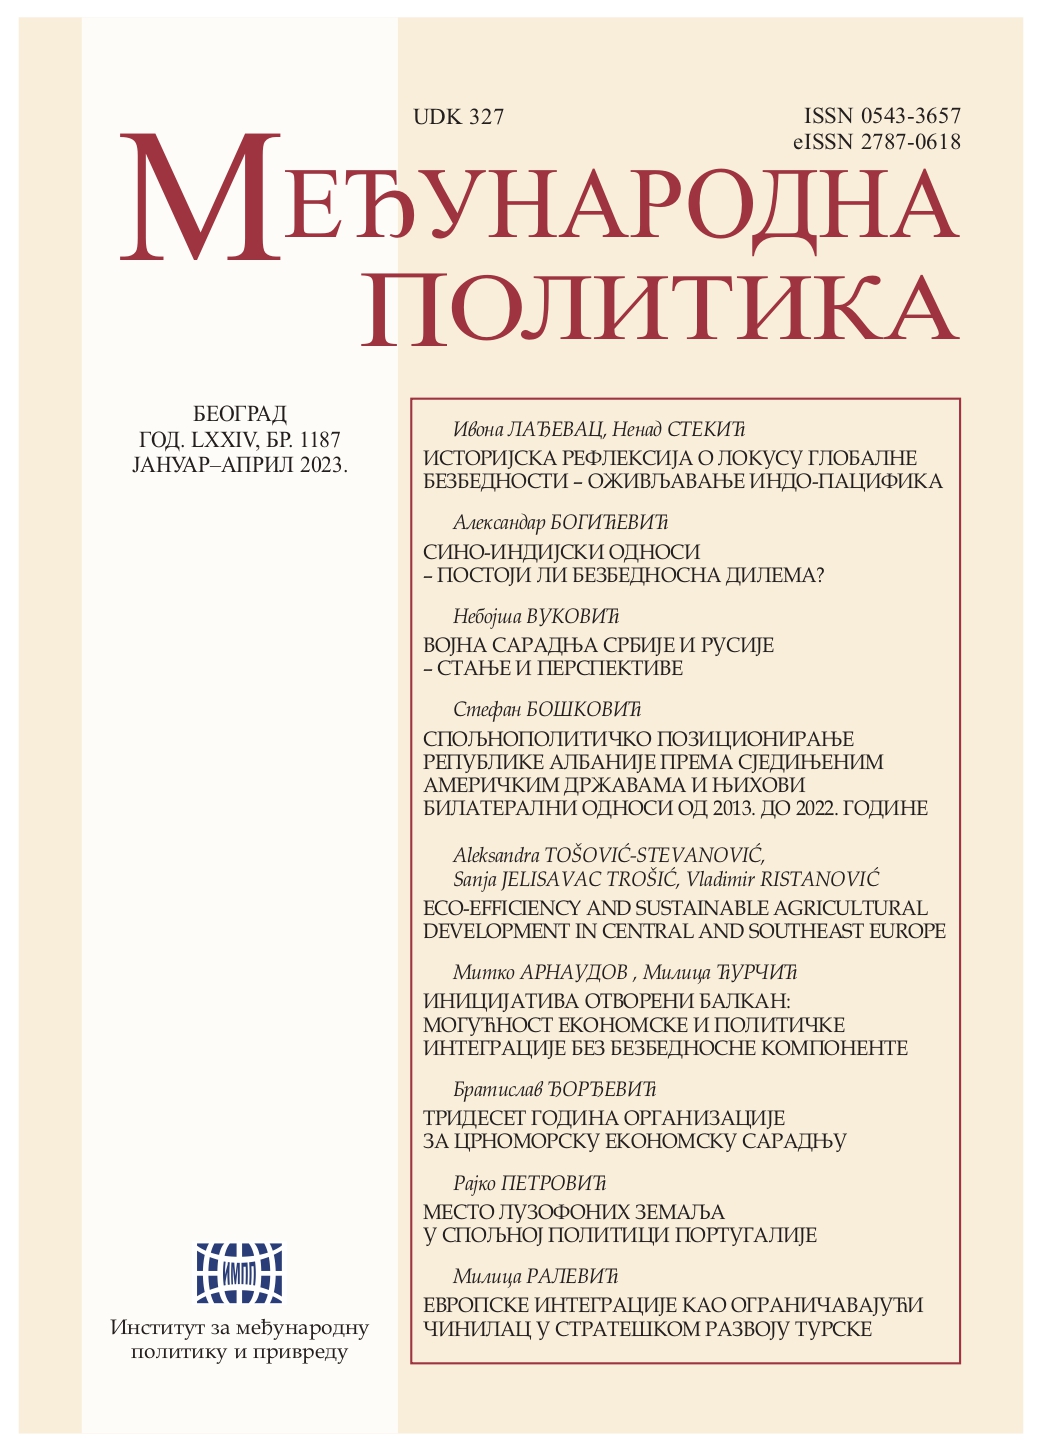 Military Cooperation Between Serbia and Russia – Situation and Perspectives Cover Image